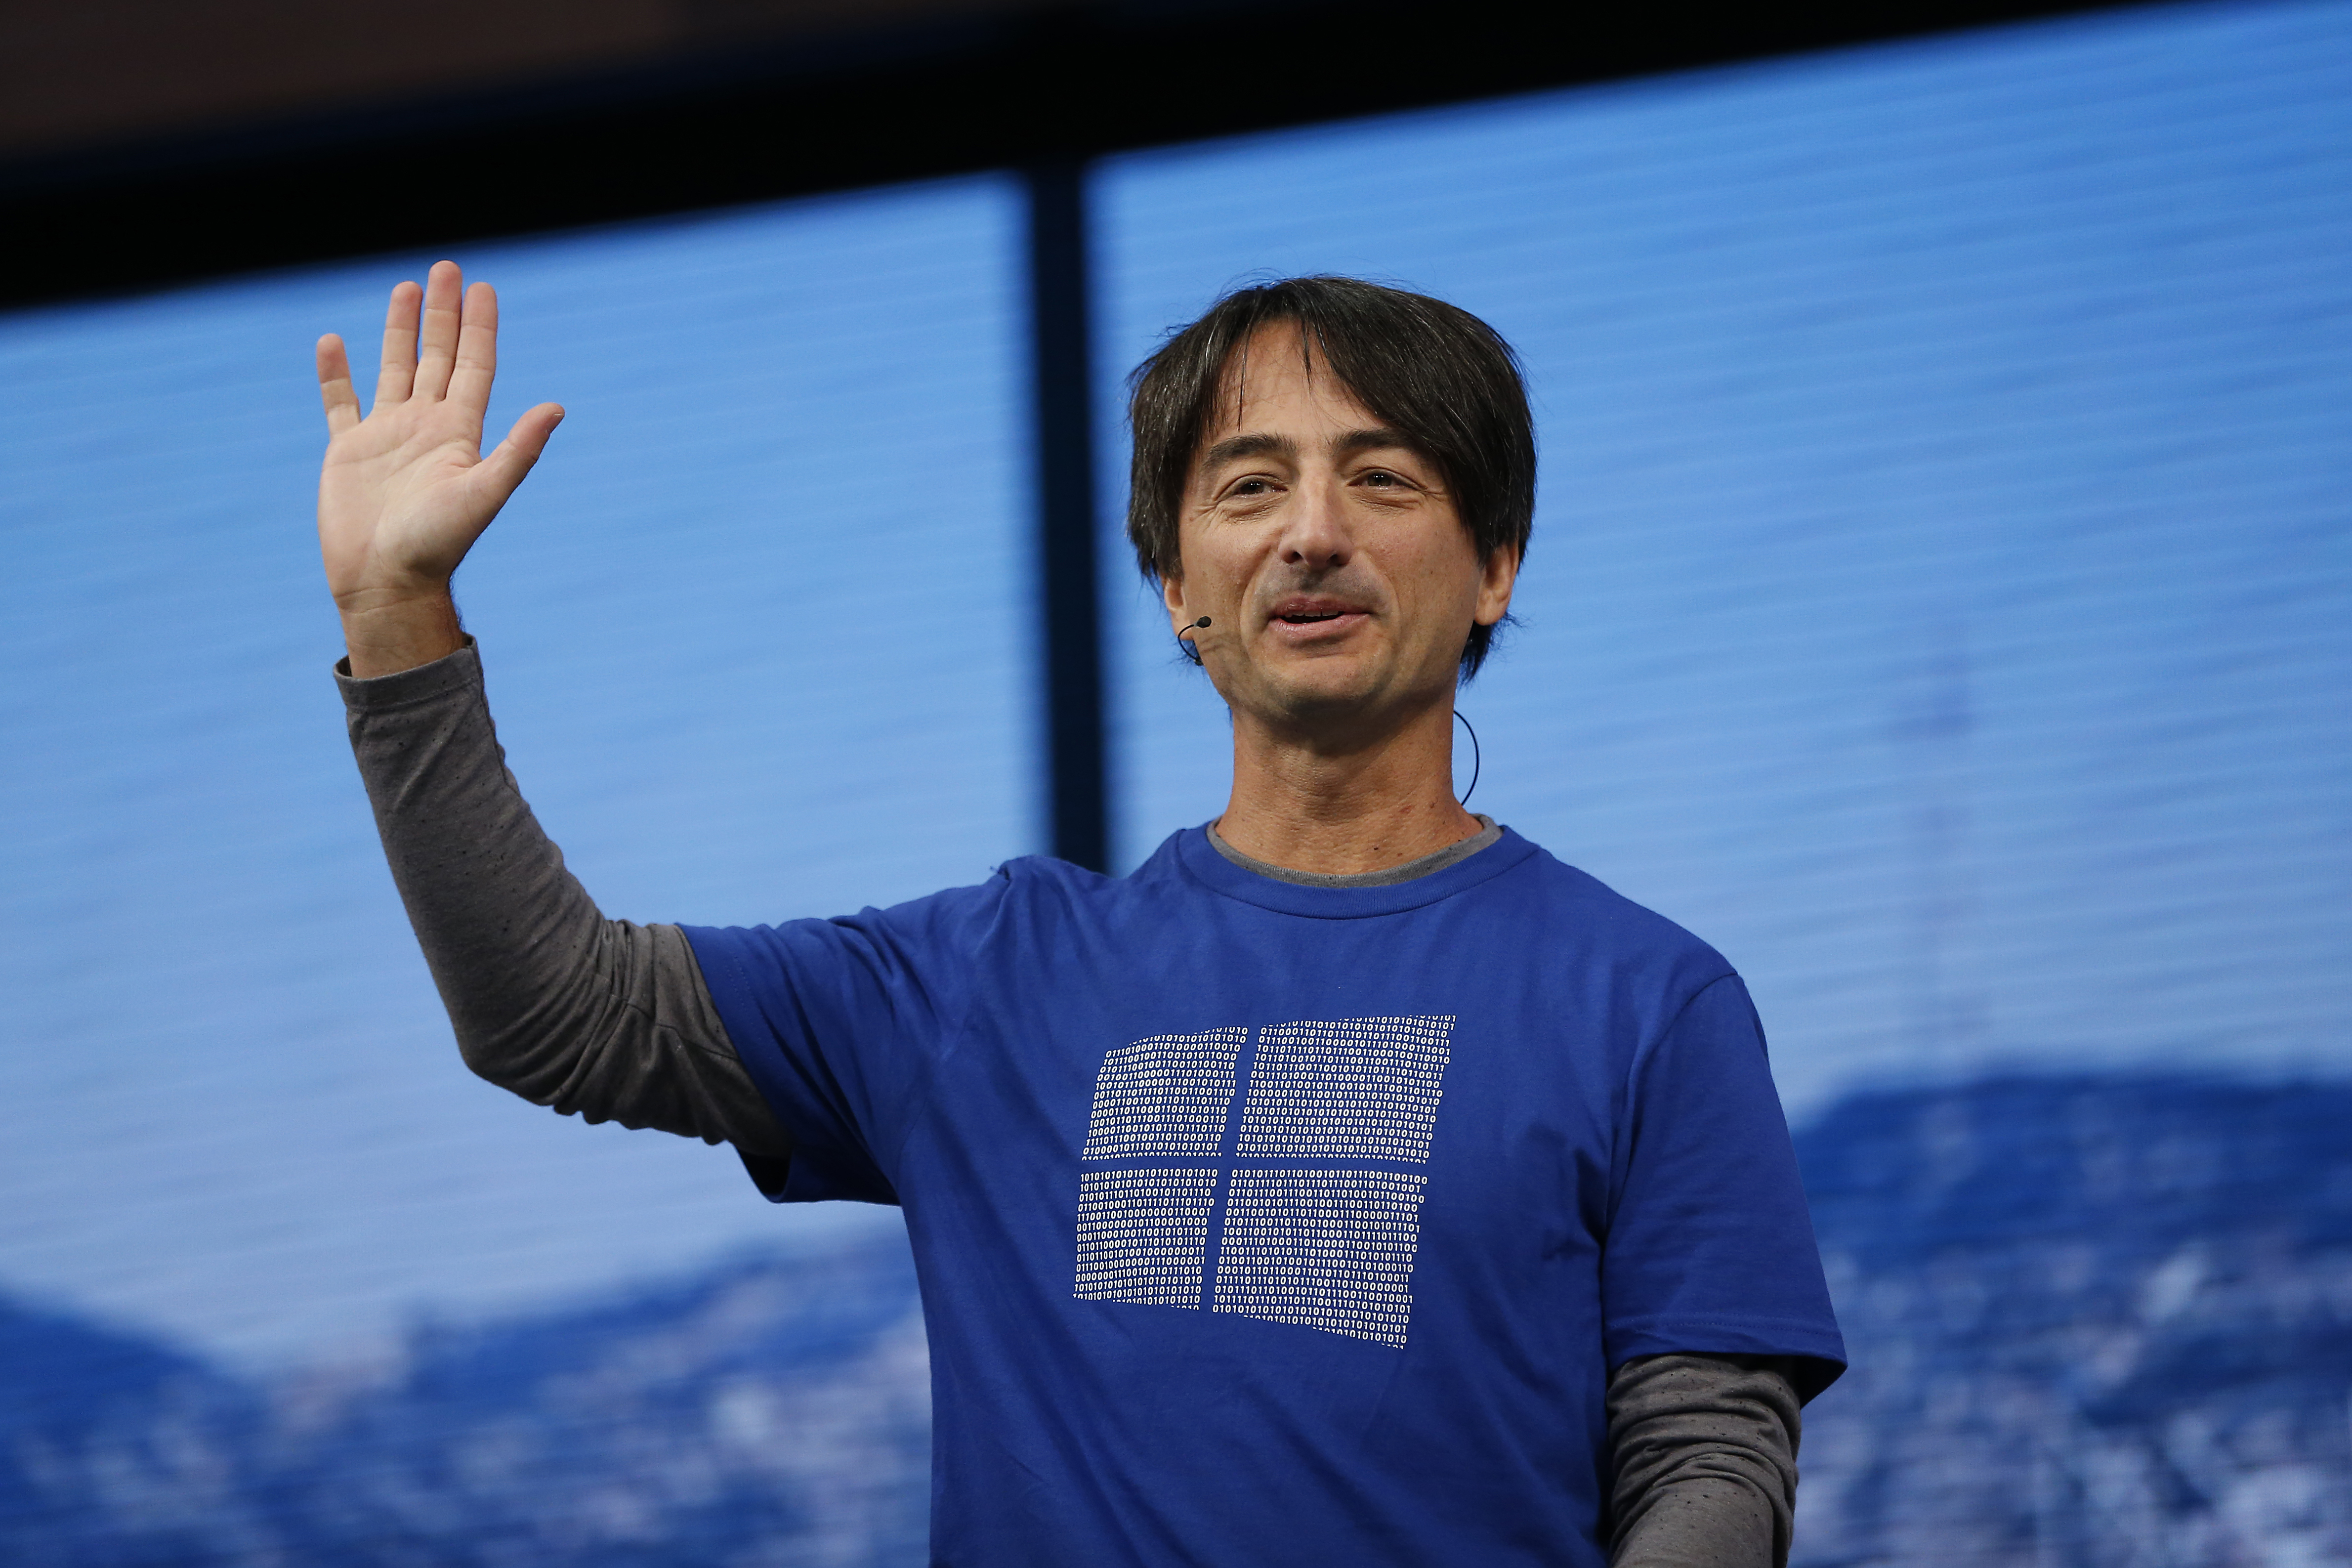 Joe Belfiore, corporate vice president, operating systems group at Microsoft, speaks on stage during the 2015 Microsoft Build Conference on April 29, 2015 at Moscone Center in San Francisco, California. (Stephen Lam—Getty Images)